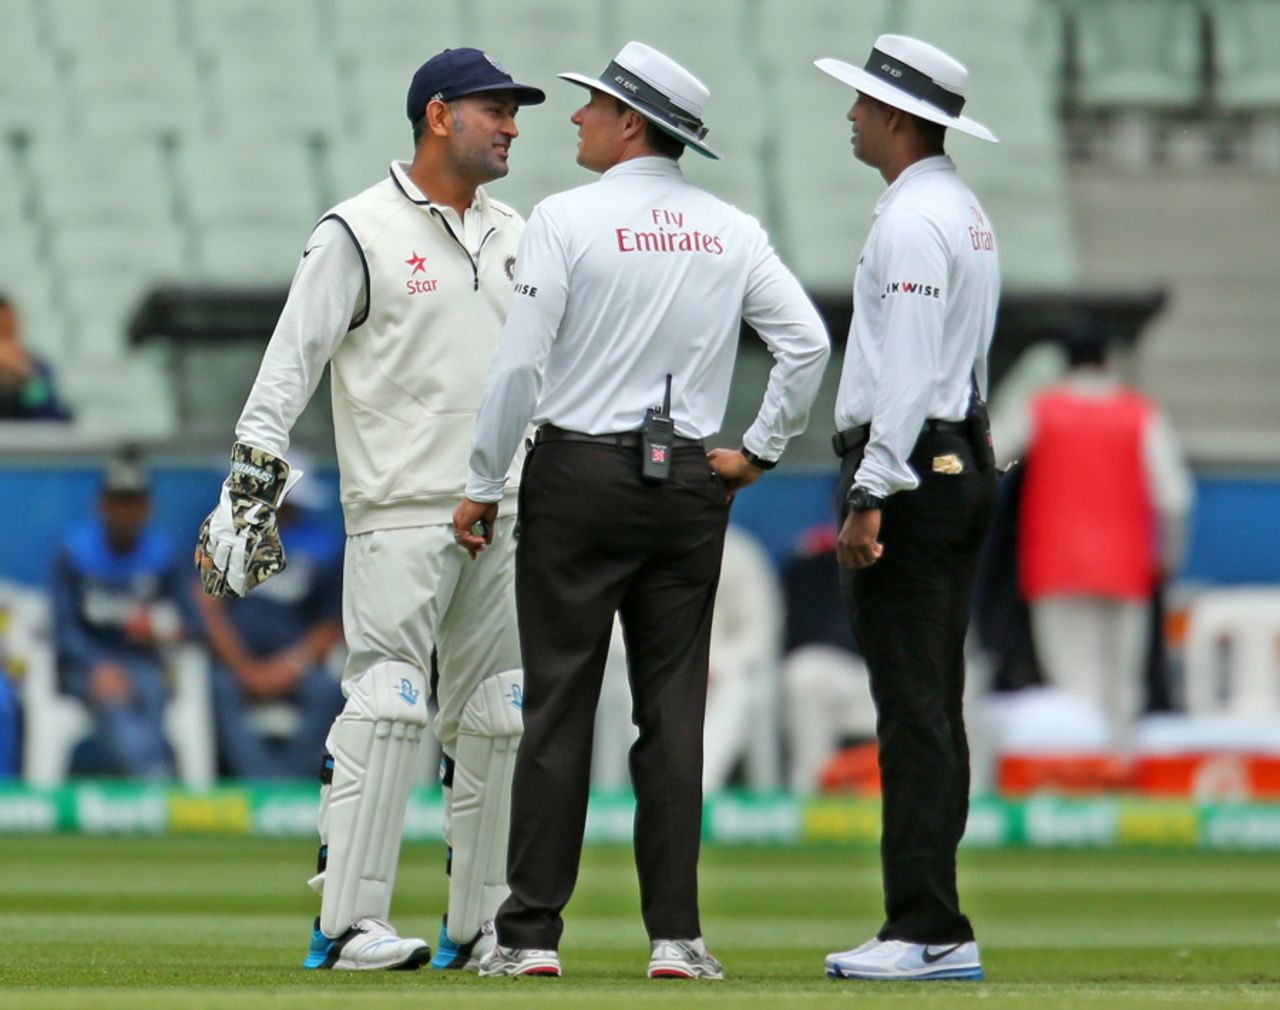 MS Dhoni has a chat with the umpires as a drizzle comes down, Australia v India, 3rd Test, Melbourne, 5th day, December 30, 2014